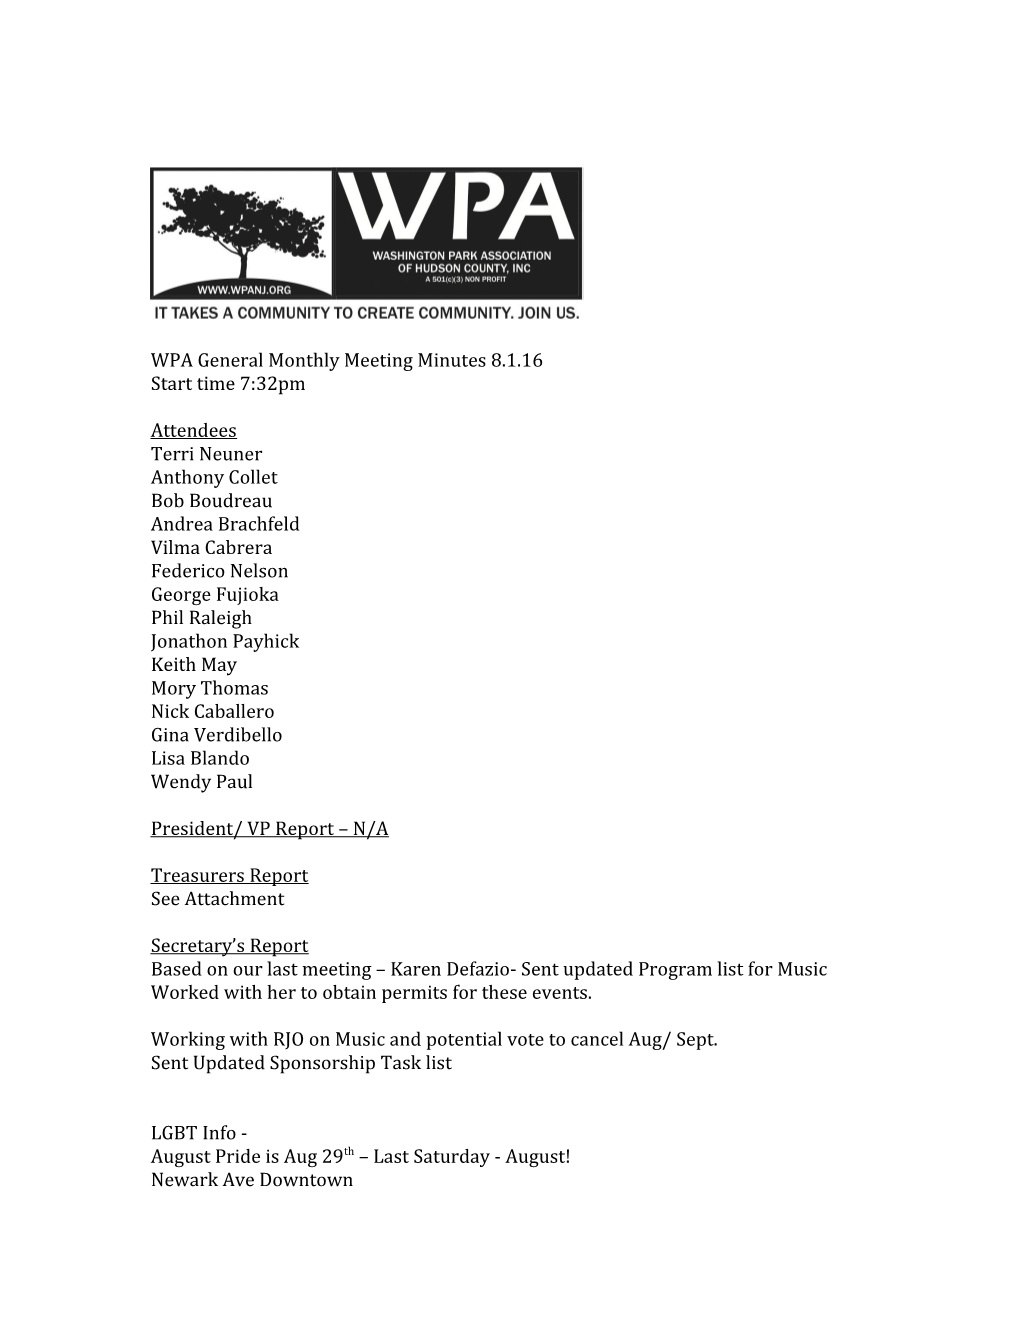 WPA General Monthly Meeting Minutes 8.1.16